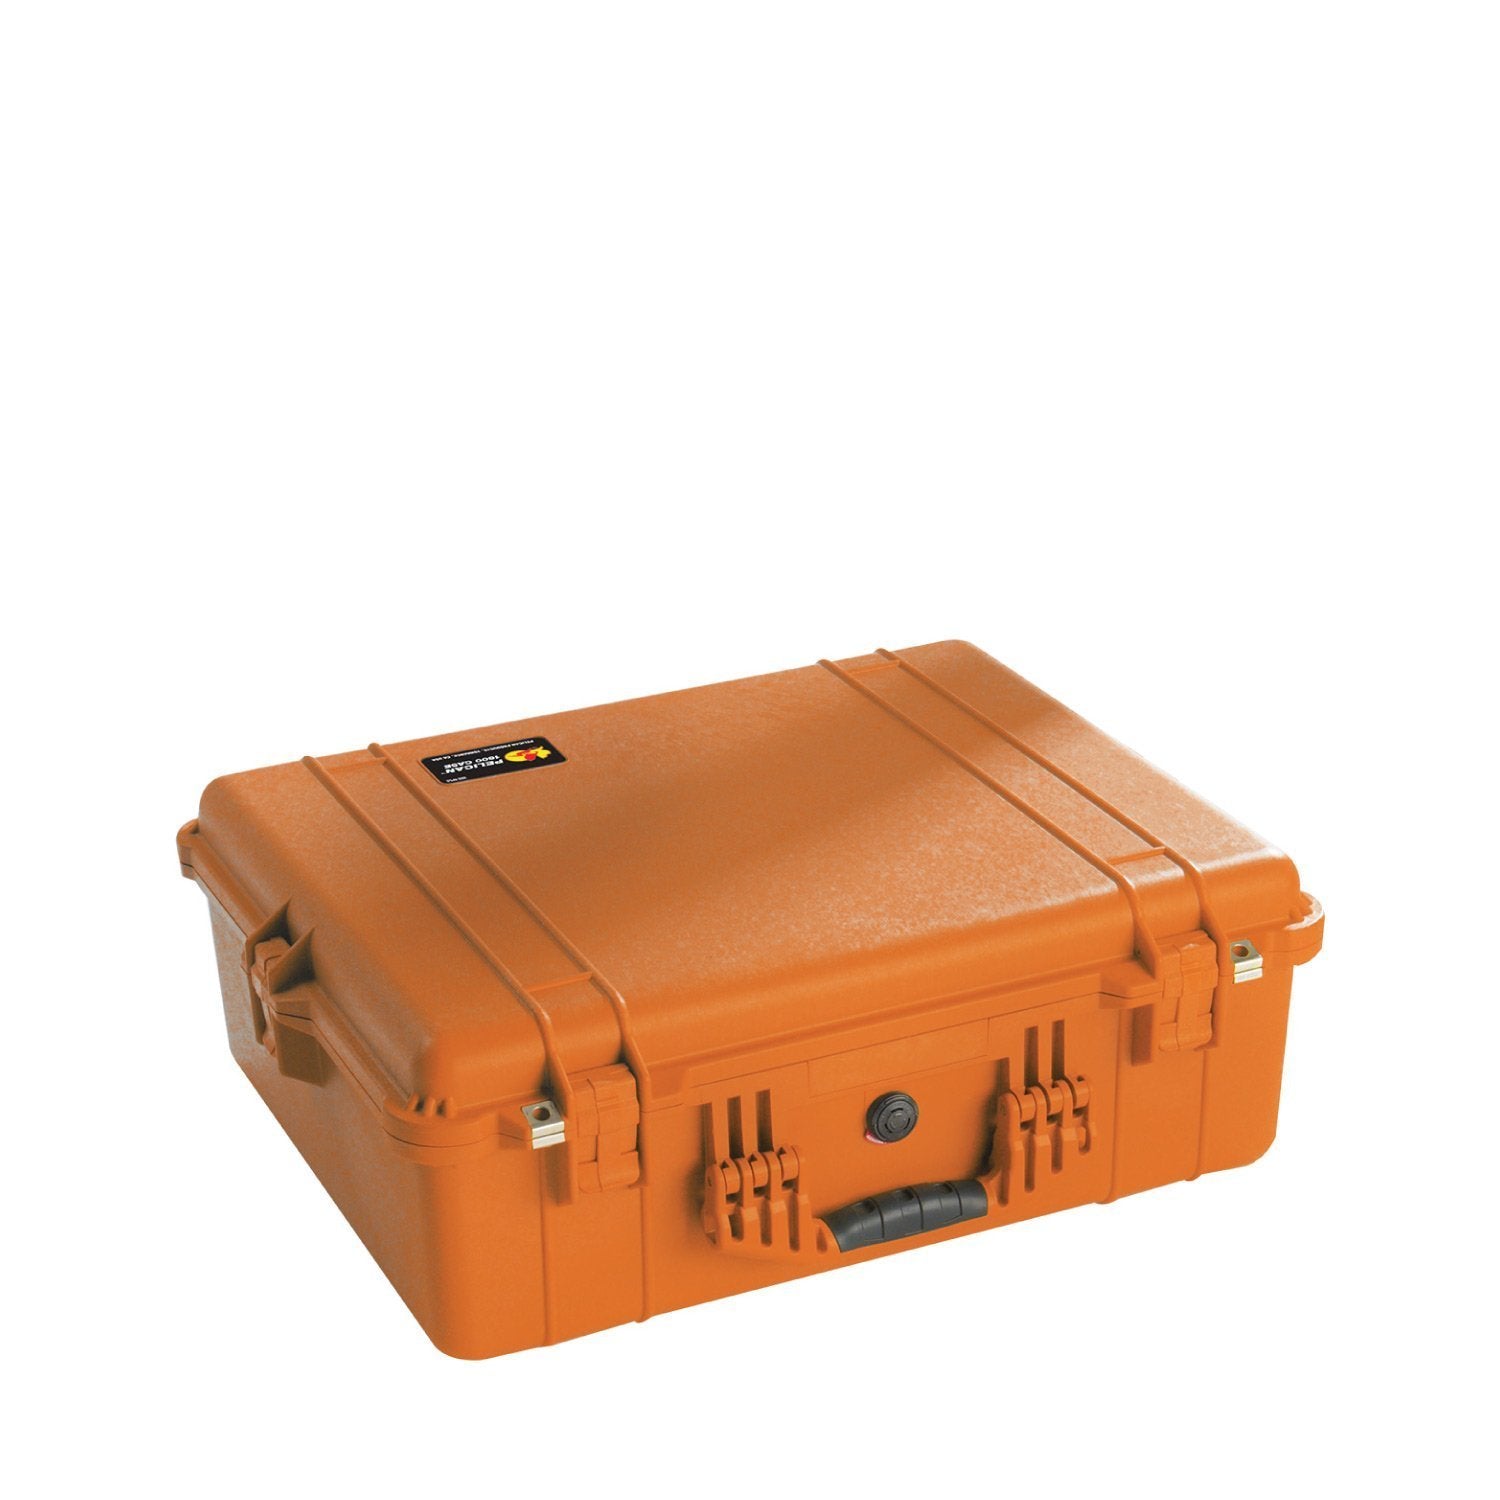 Pelican 1600 Classic Large Hard Case Orange Cases Pelican Products With Foam Tactical Gear Supplier Tactical Distributors Australia